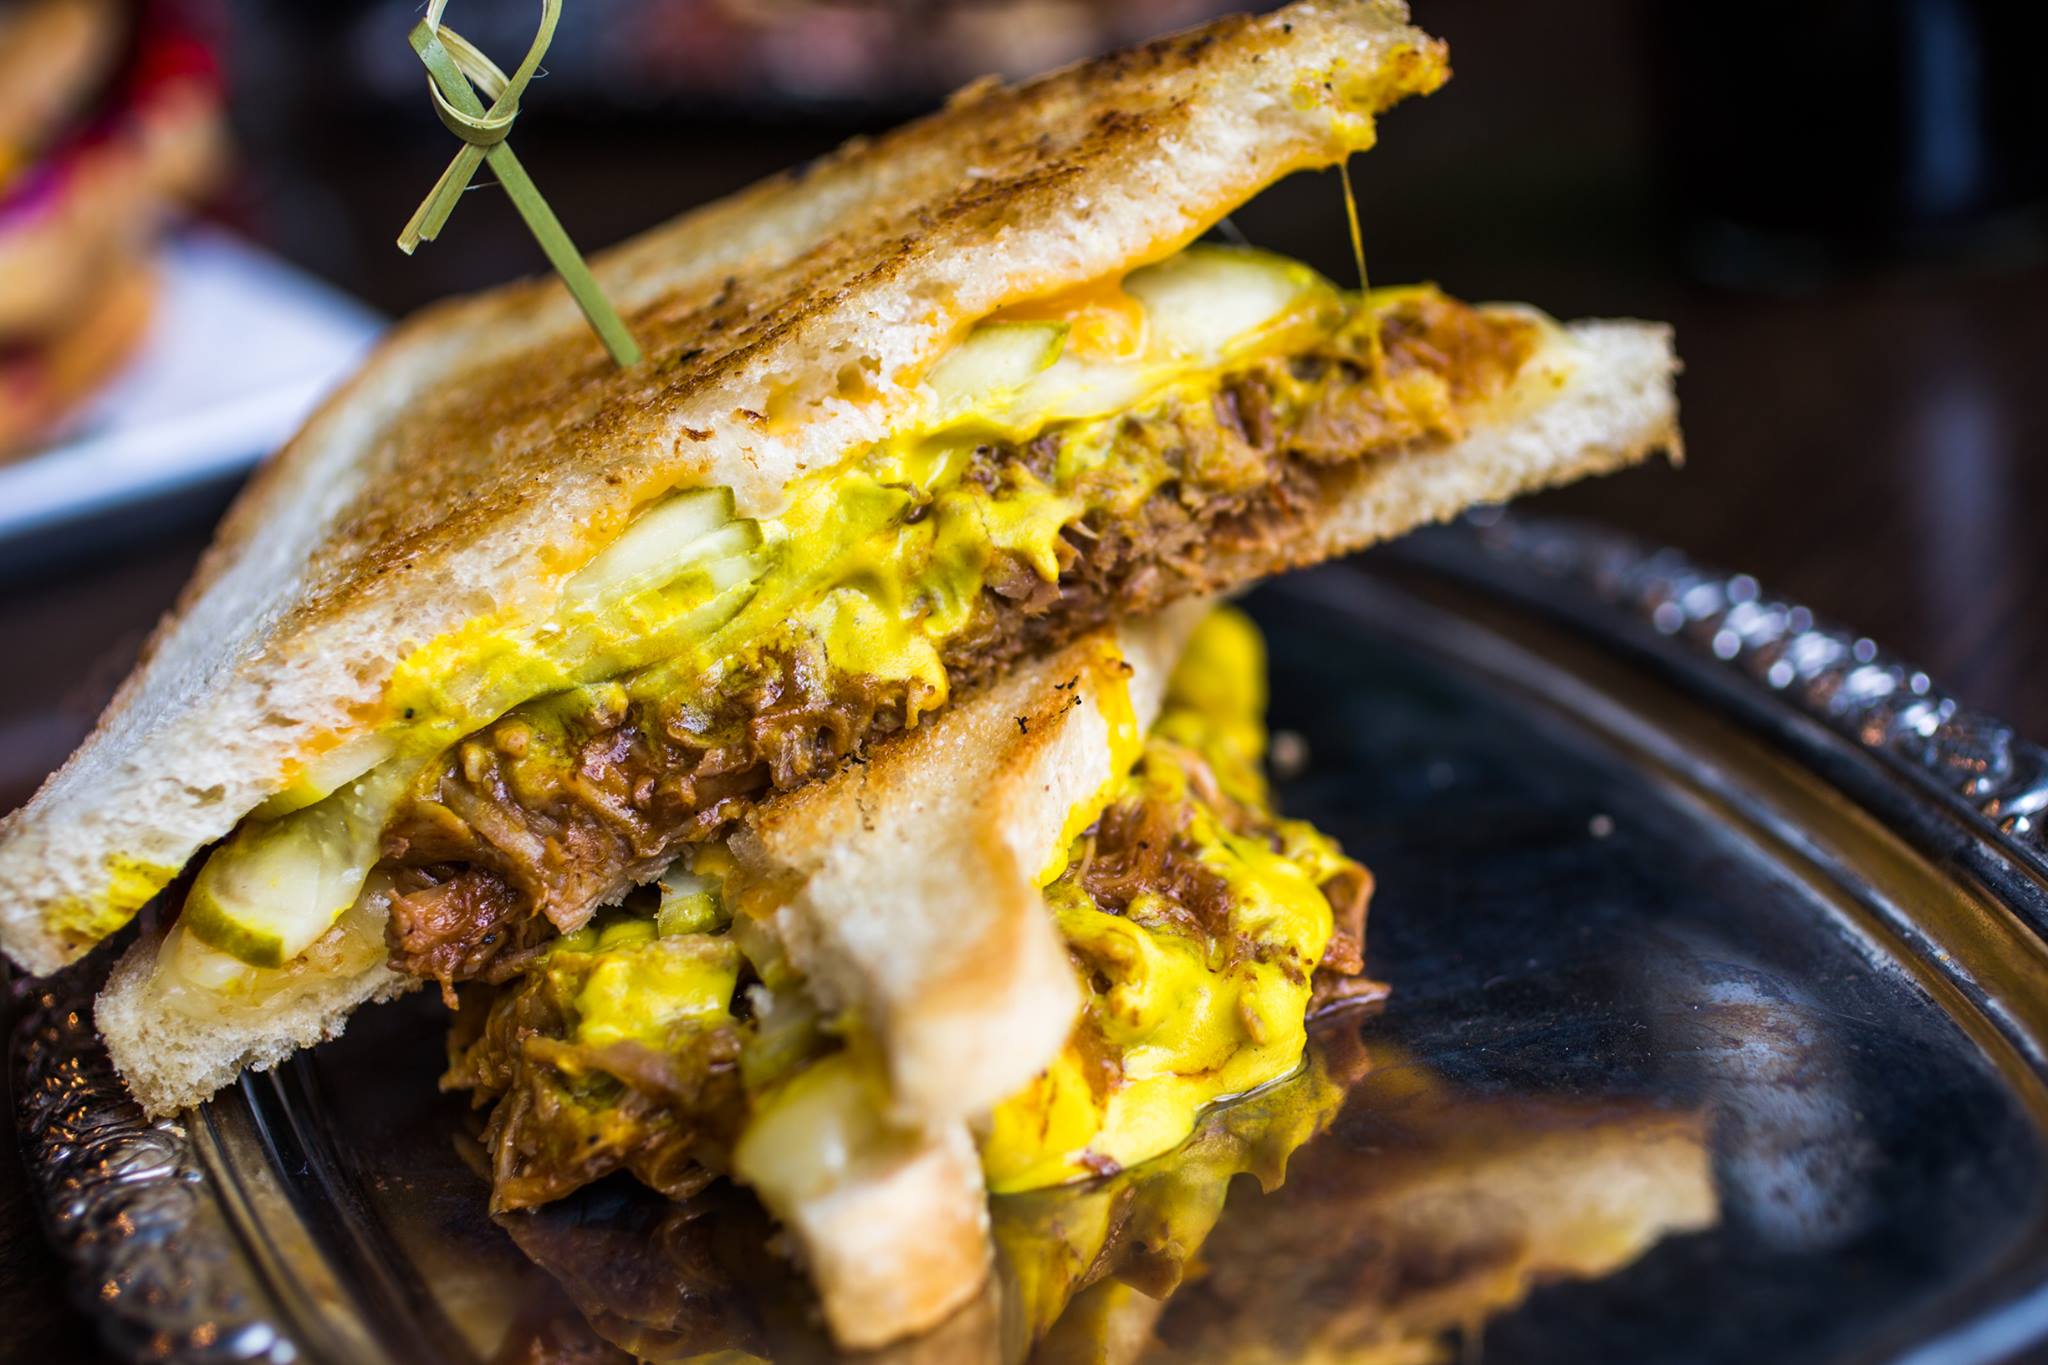 Photo: Facebook L'Gros luxe Plus exotique le Grilled cheese cubano